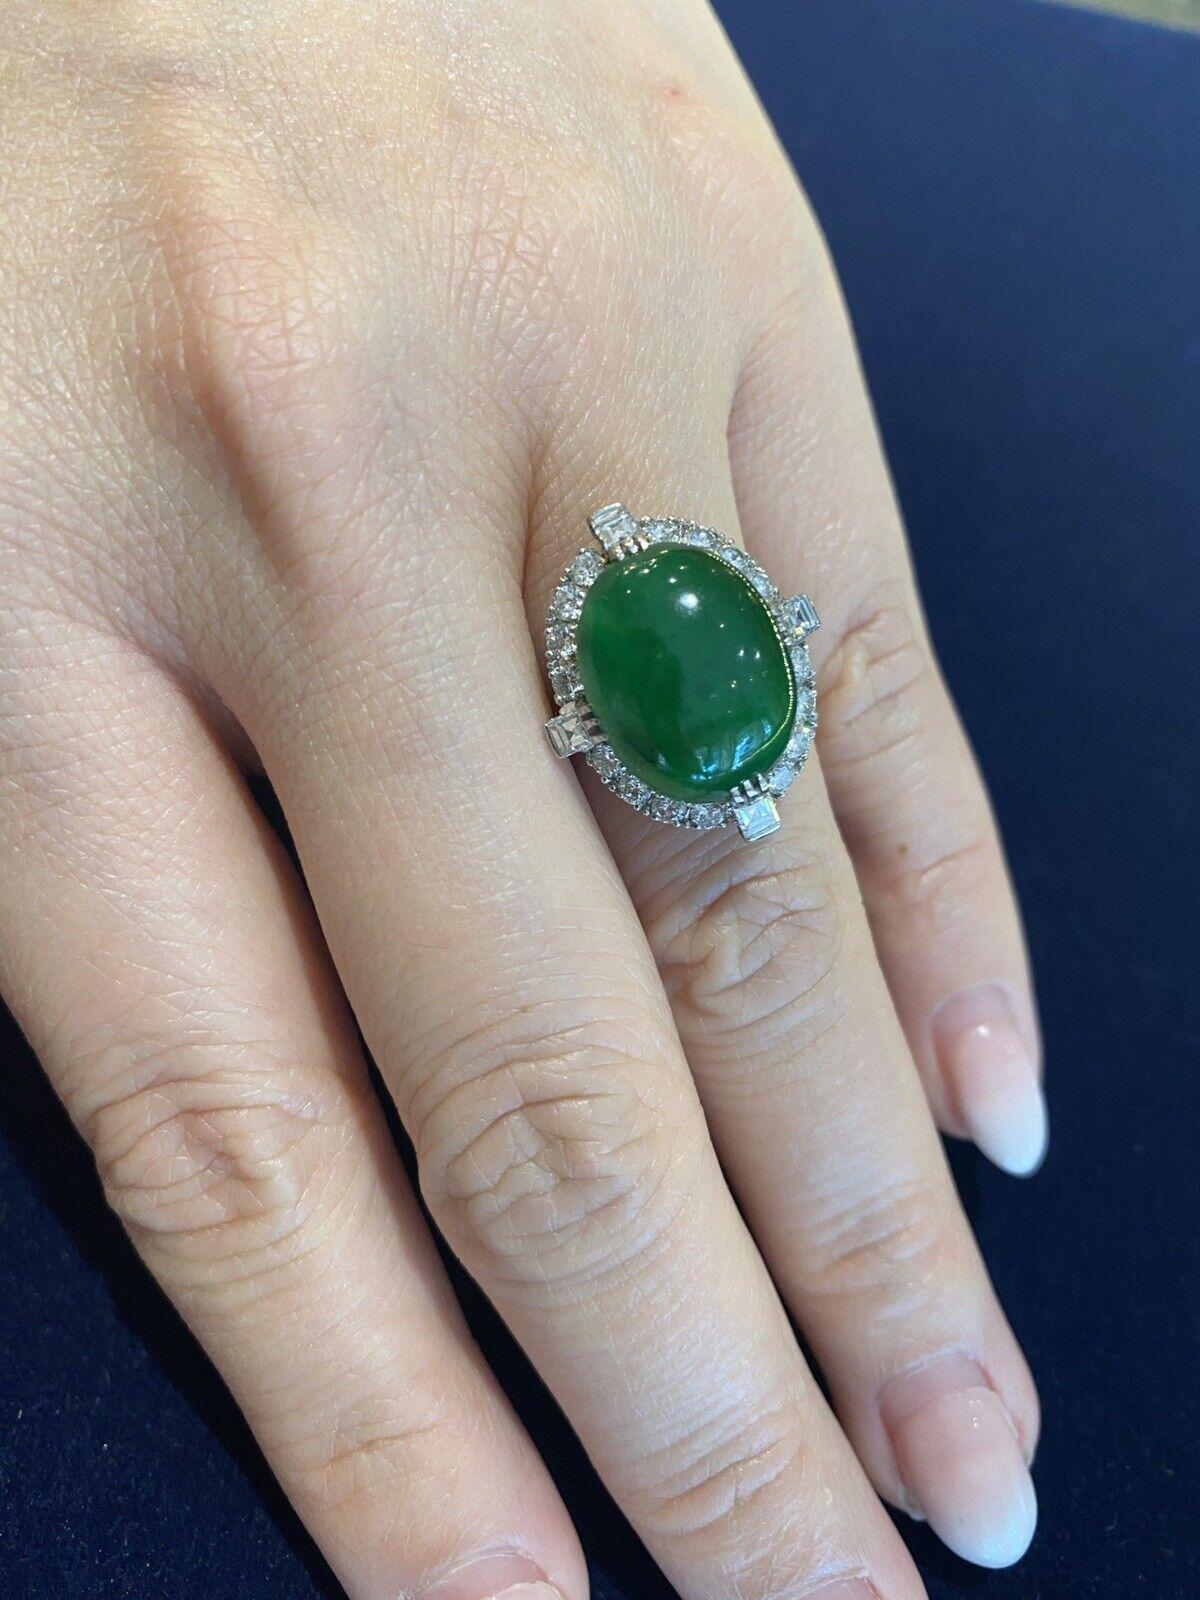 GIA Untreated Jade Oval Cabochon and Diamond Vintage Platinum Ring

Vintage Jade Cabochon Ring features a large Oval Jade Cabochon surrounded by 20 Round and Square Diamonds in a Vintage Platinum Setting.

The Jade is natural and untreated.
Total